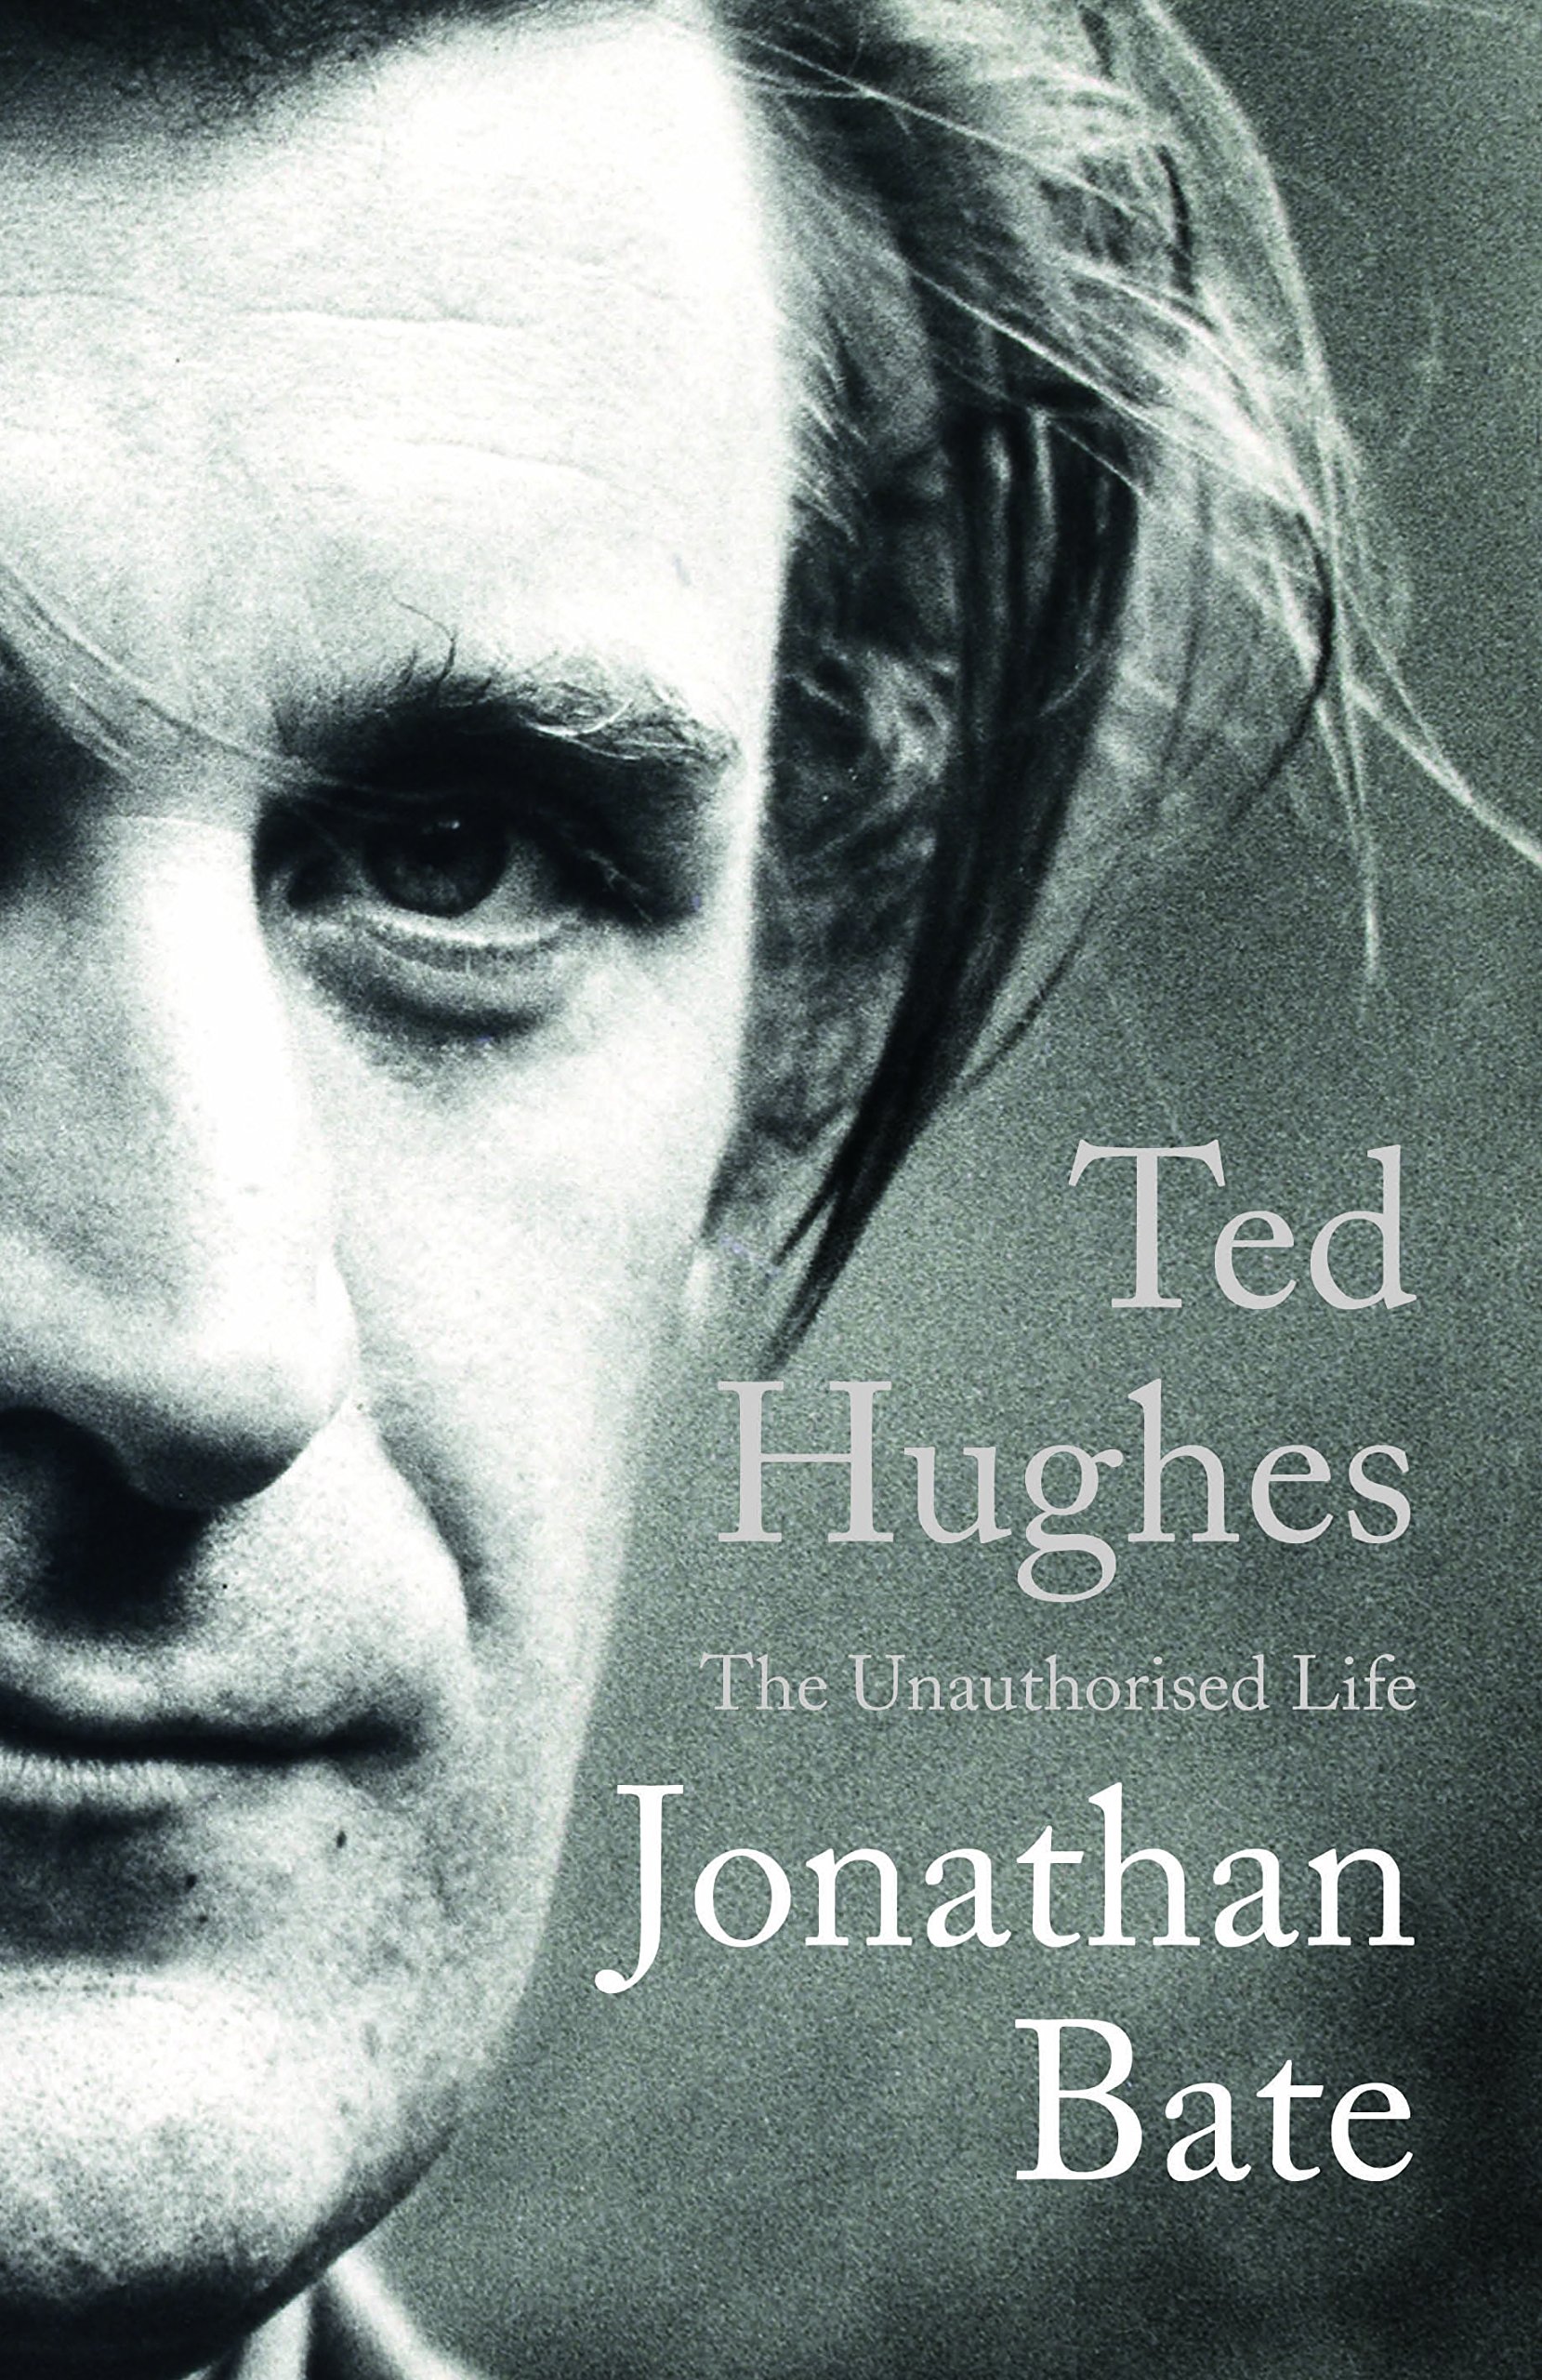 Sir Jonathan Bate's book "Ted Hughes: The Unauthorised Life."